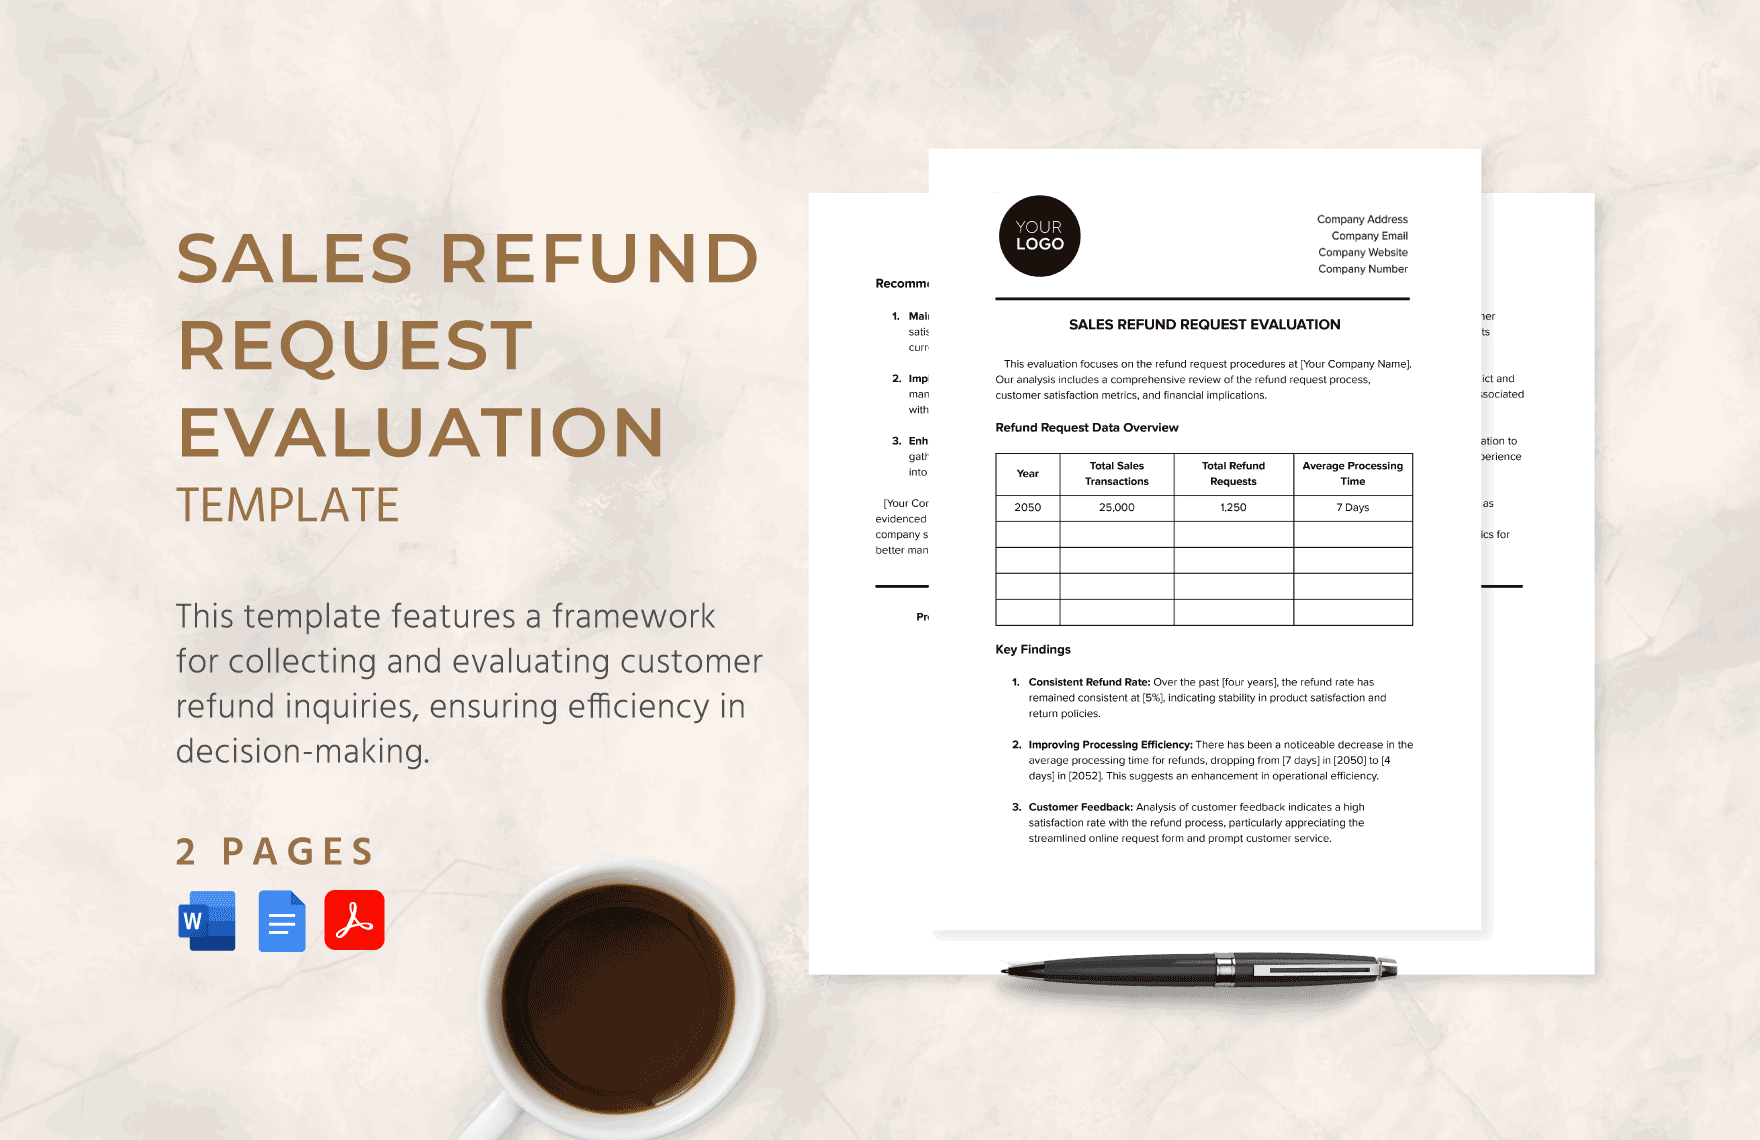 Sales Refund Request Evaluation Template in Word, Google Docs, PDF